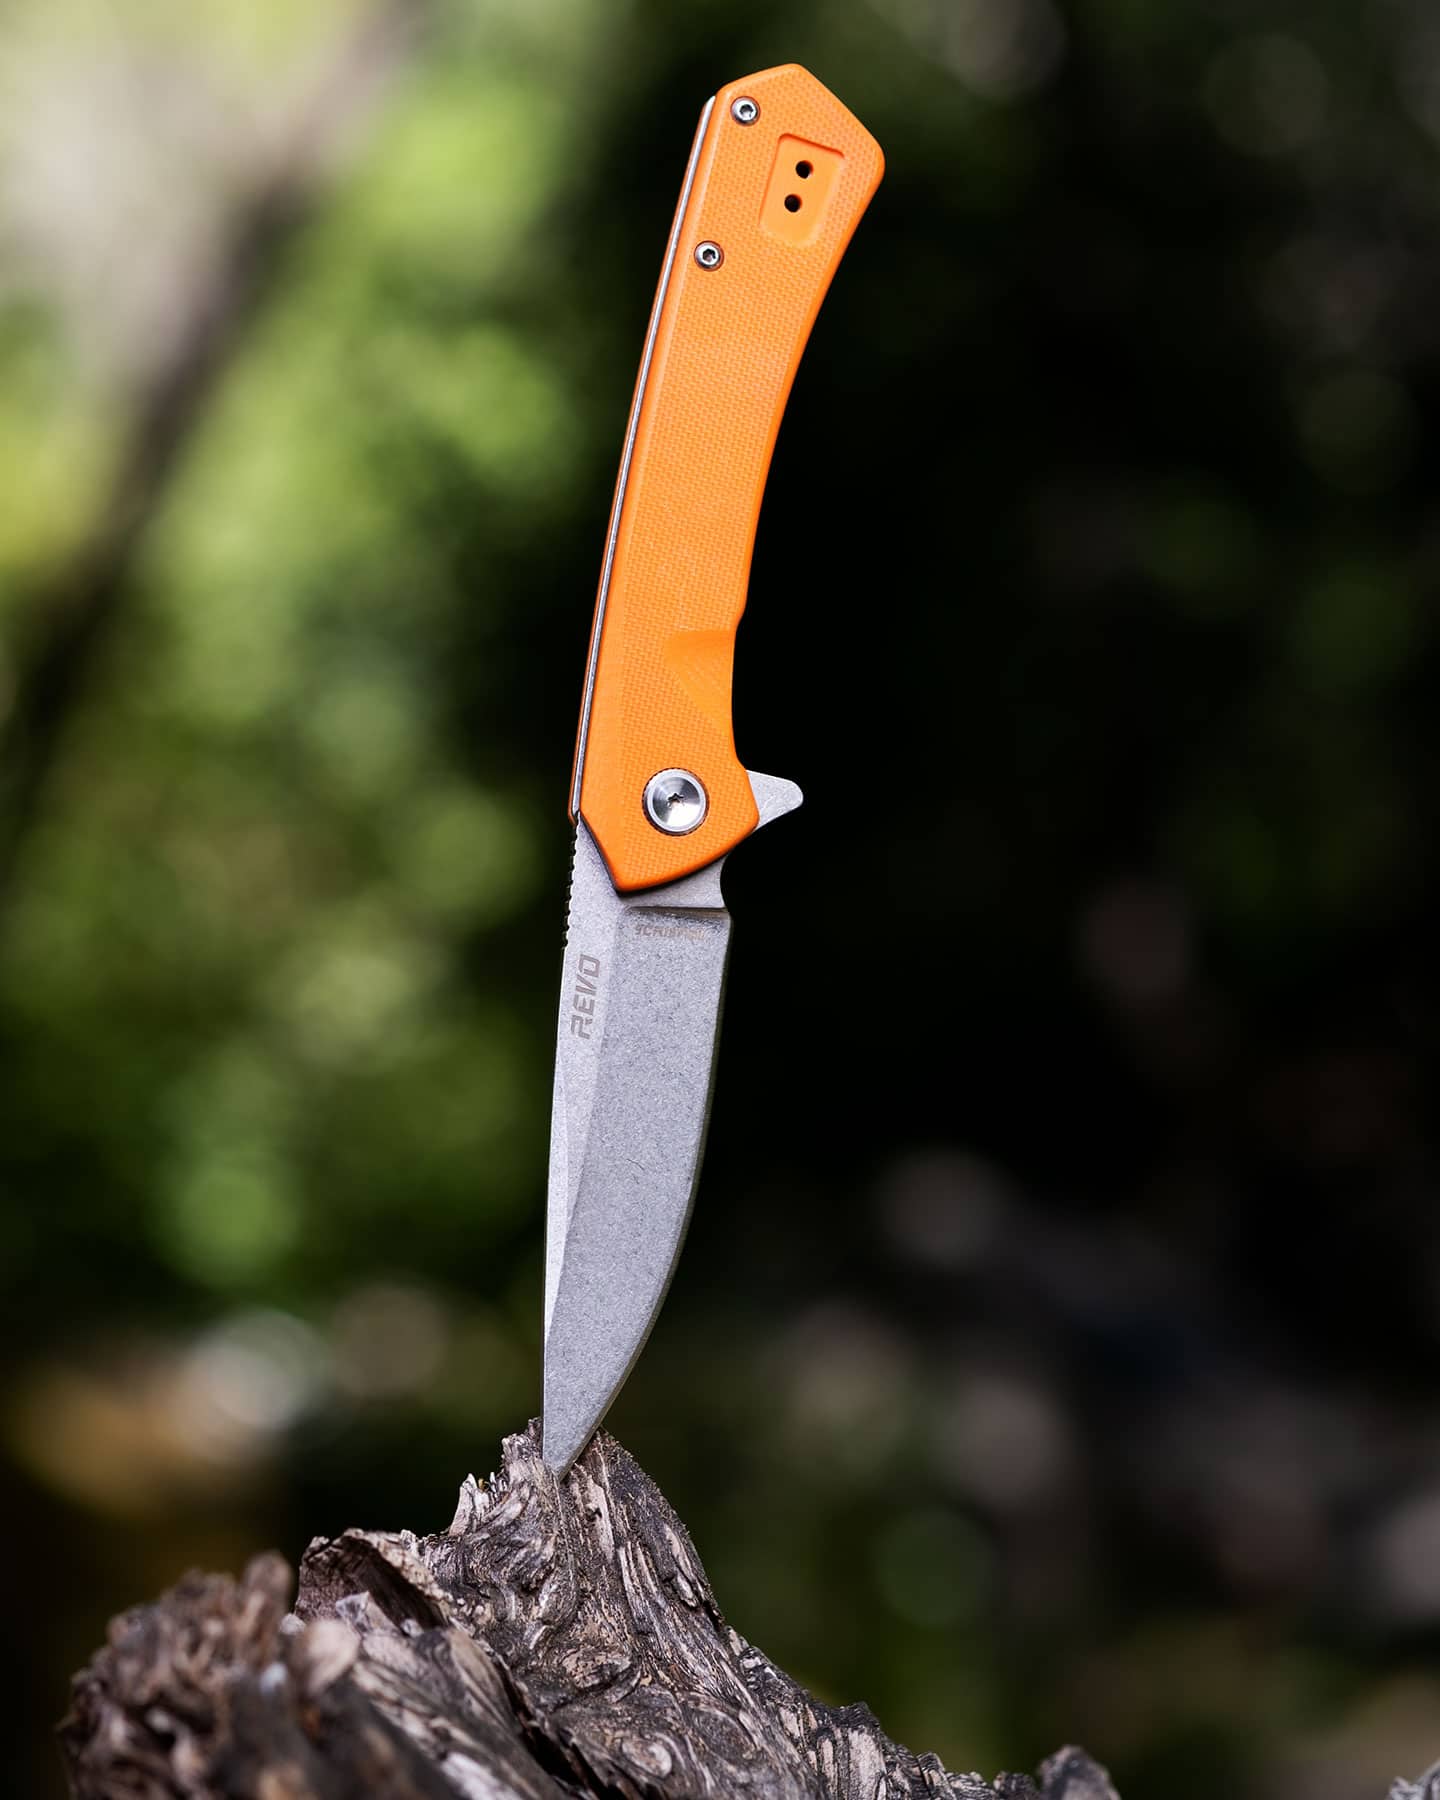 Header image for our in-depth review of the Revo Warden 2 pocket knife.